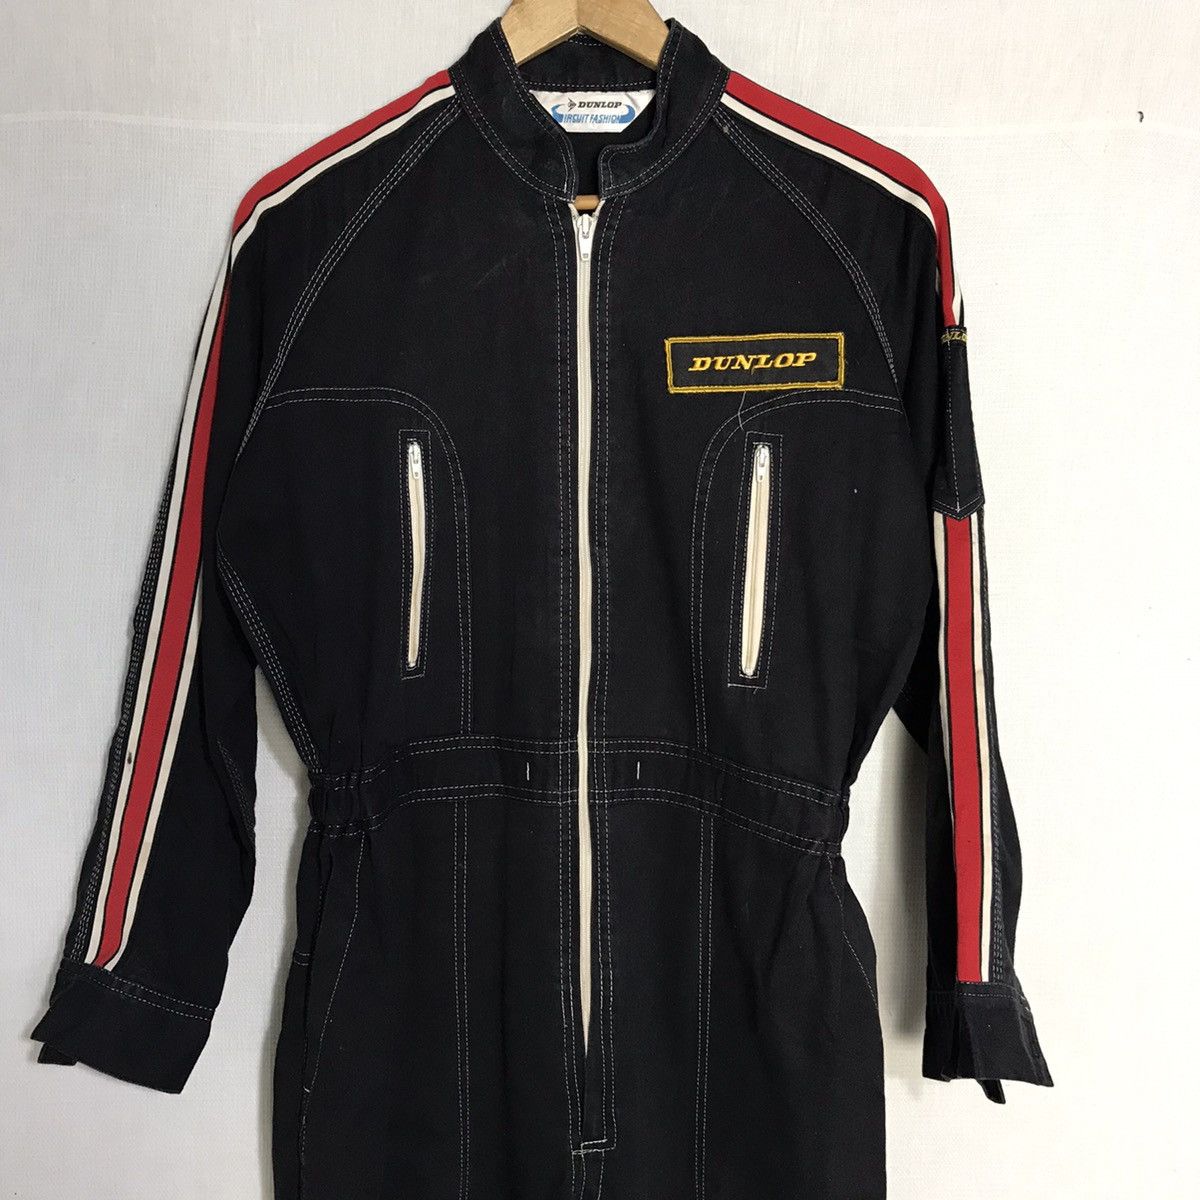 Vintage dunlop circuit fashion racing big spell overall - 3